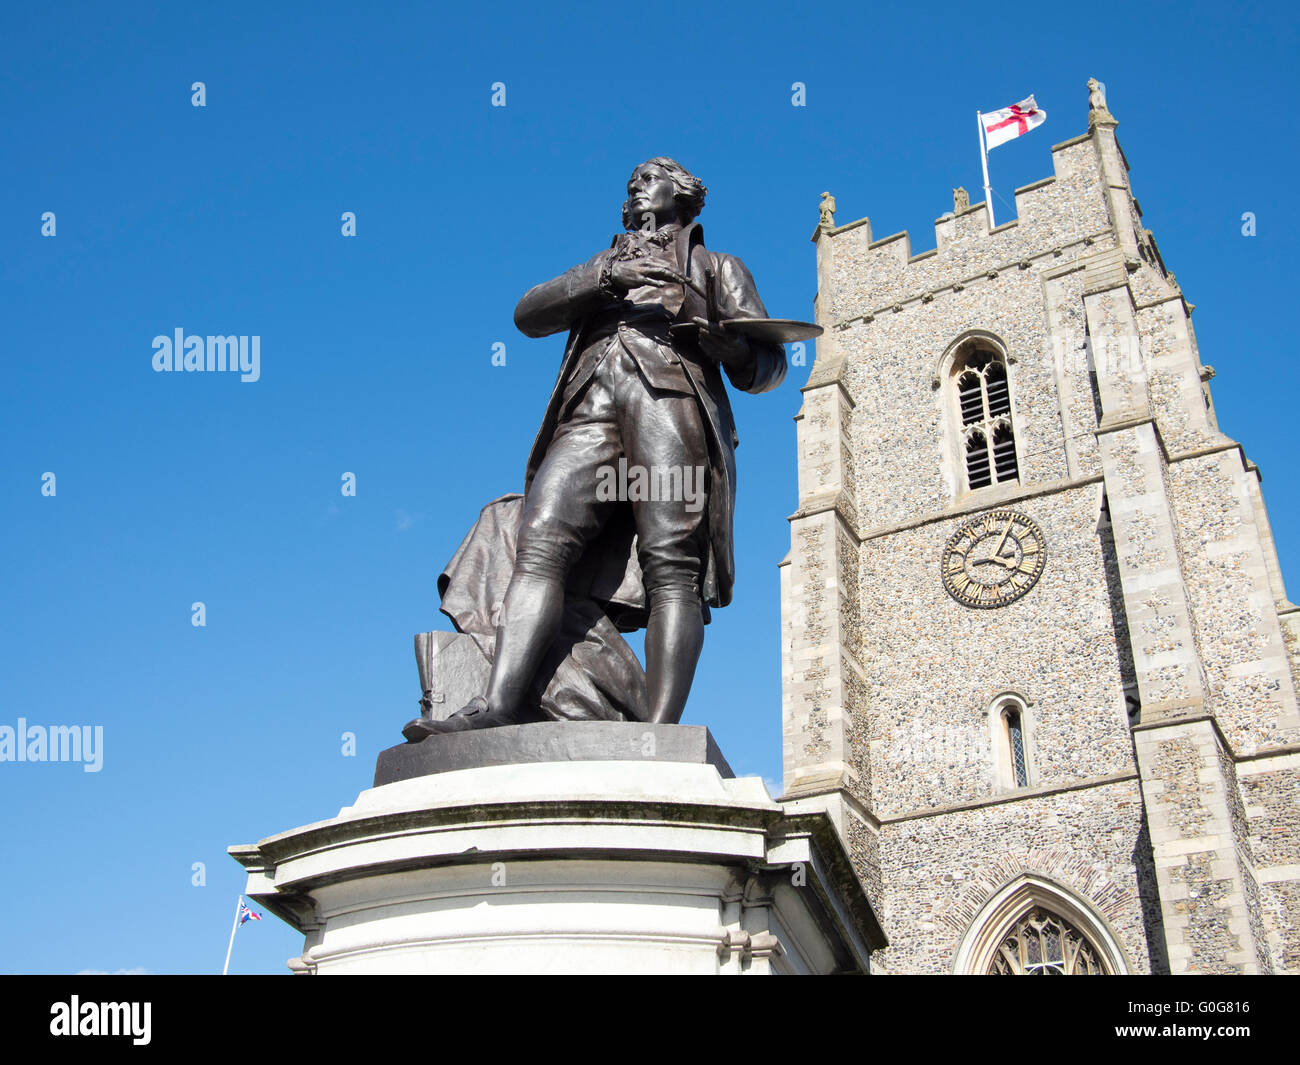 A statue of the artist Thomas Gainsborough outside St Peter's Church in Sudbury, Suffolk, England. Stock Photo